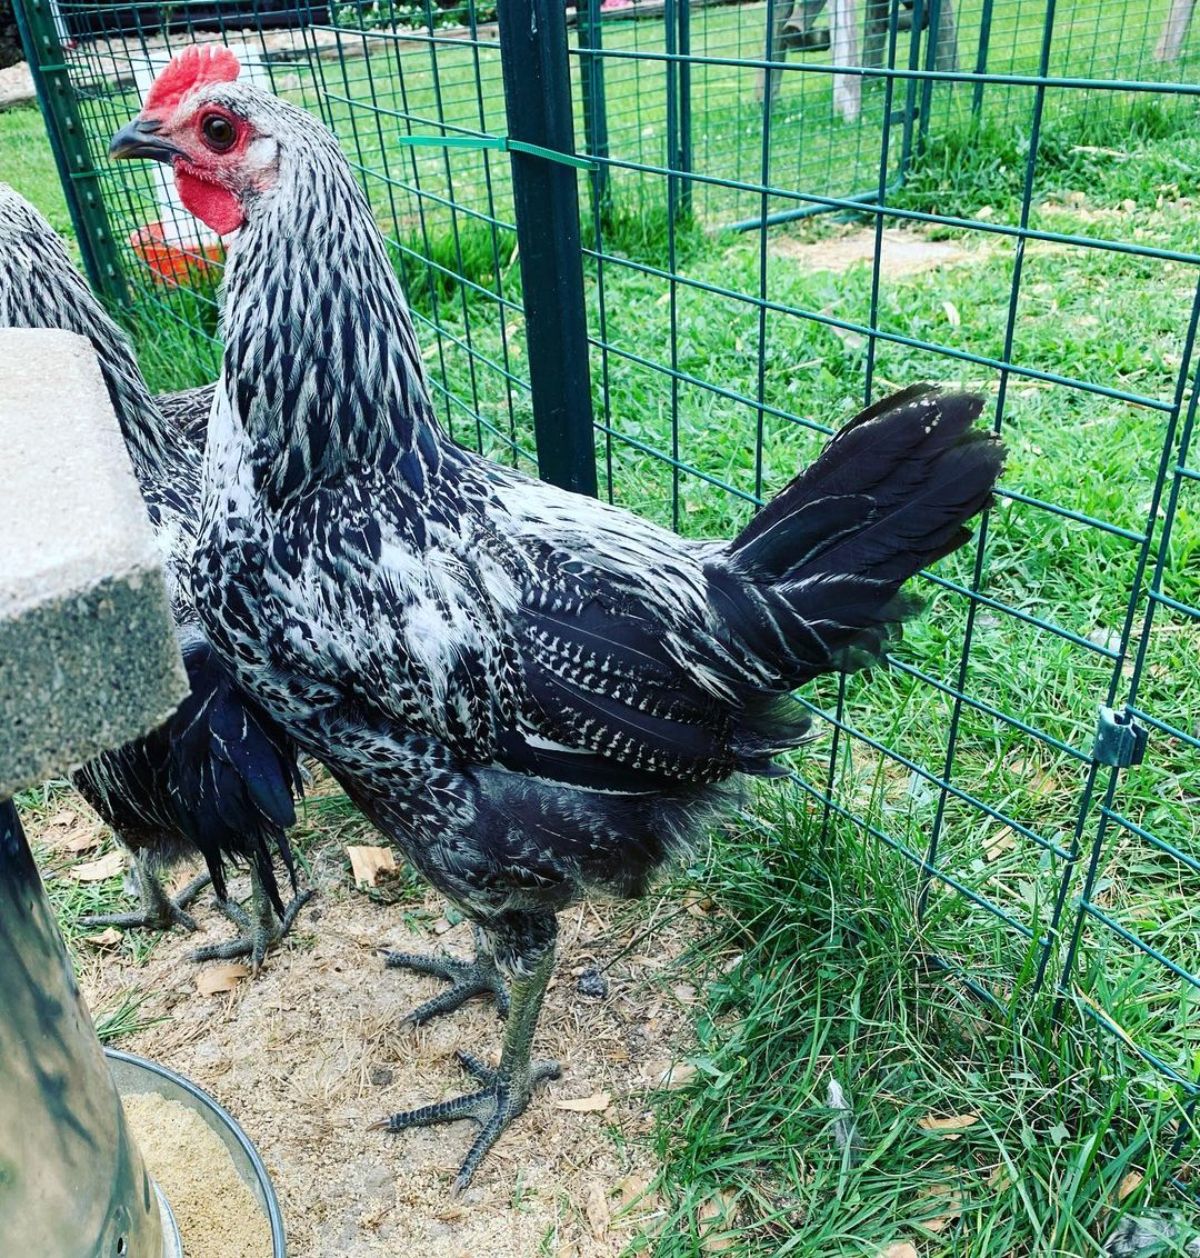 An Iowa blue rooster in a striking position near a metal fence.